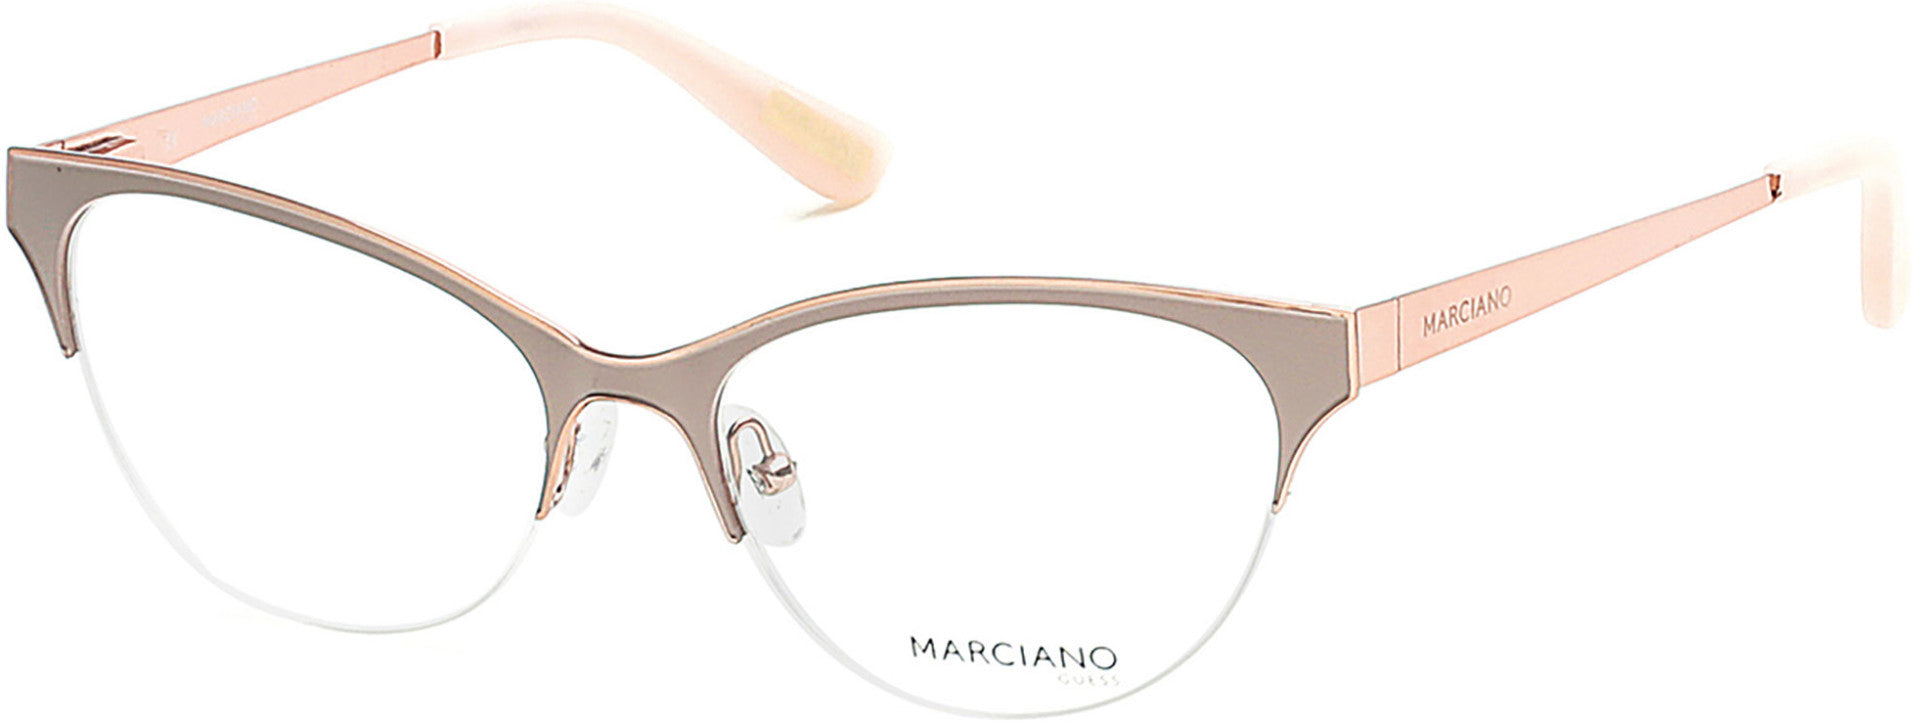 Guess By Marciano GM0277 Eyeglasses 057-057 - Shiny Beige